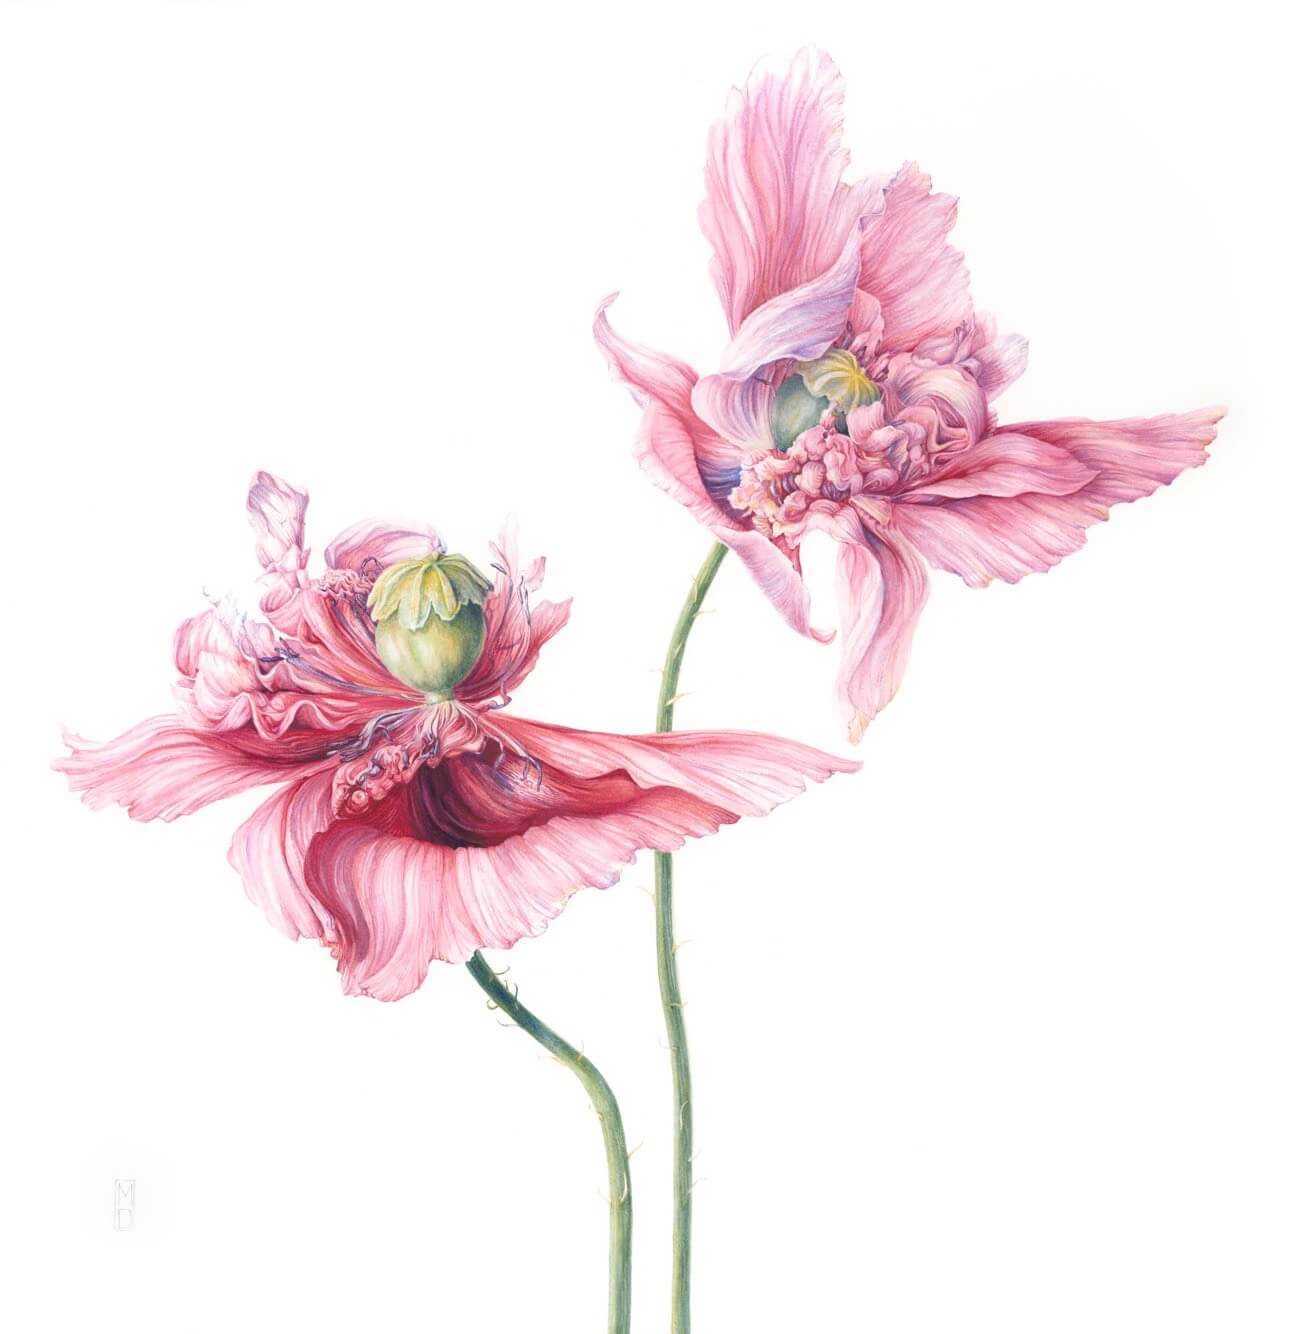 Pink flower, illustration by Mary Dillion botanical artist and tutor Clos Mirabel.